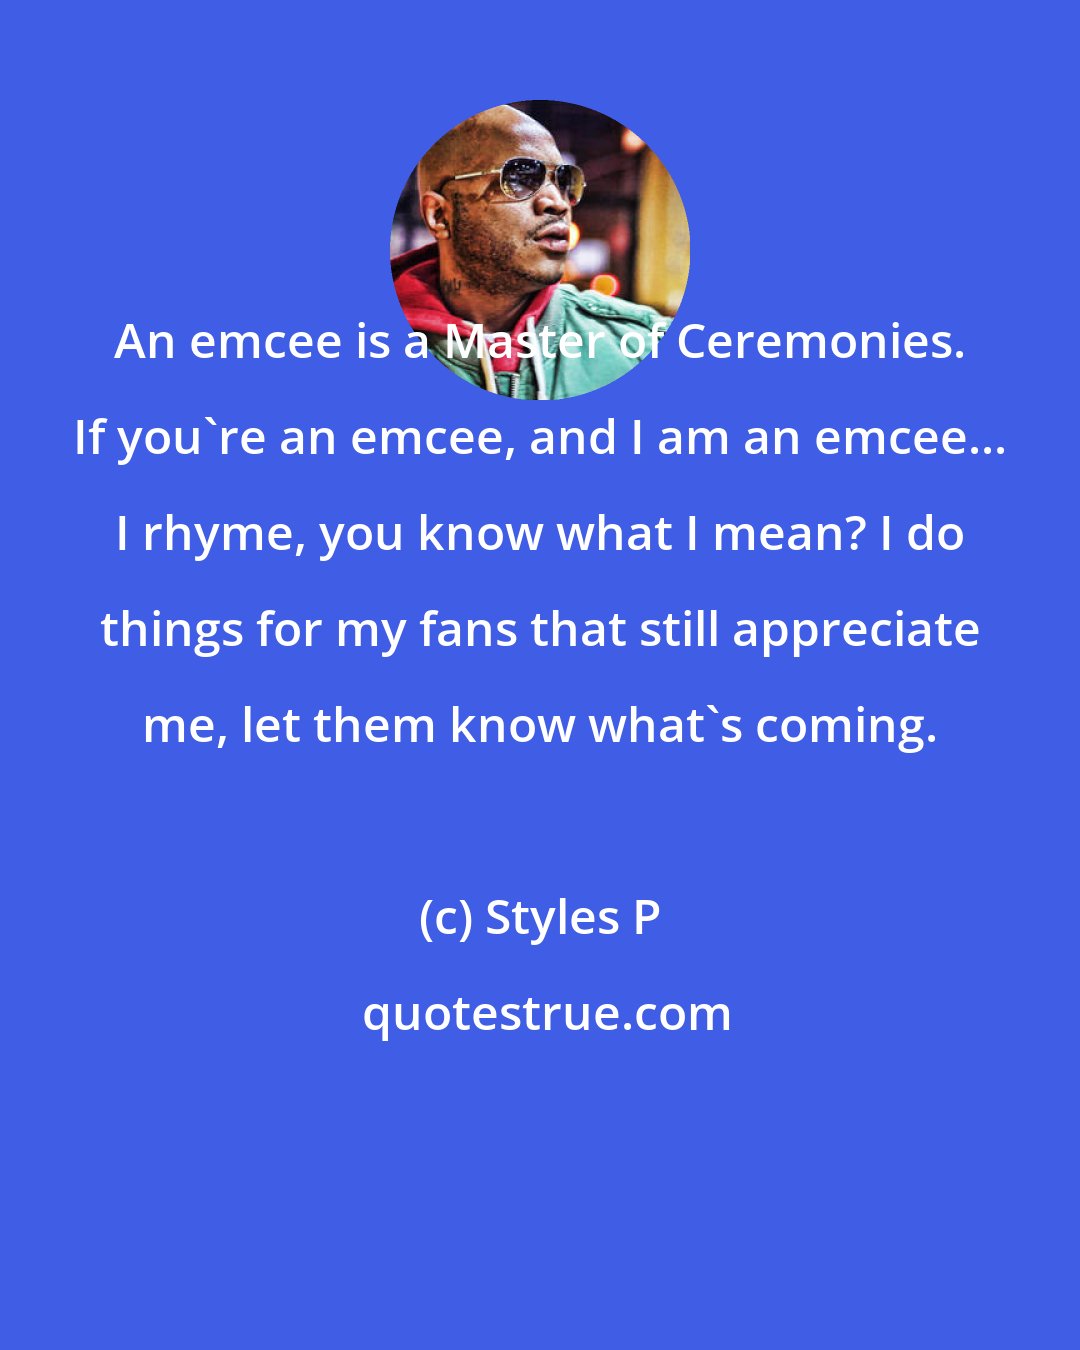 Styles P: An emcee is a Master of Ceremonies. If you're an emcee, and I am an emcee... I rhyme, you know what I mean? I do things for my fans that still appreciate me, let them know what's coming.